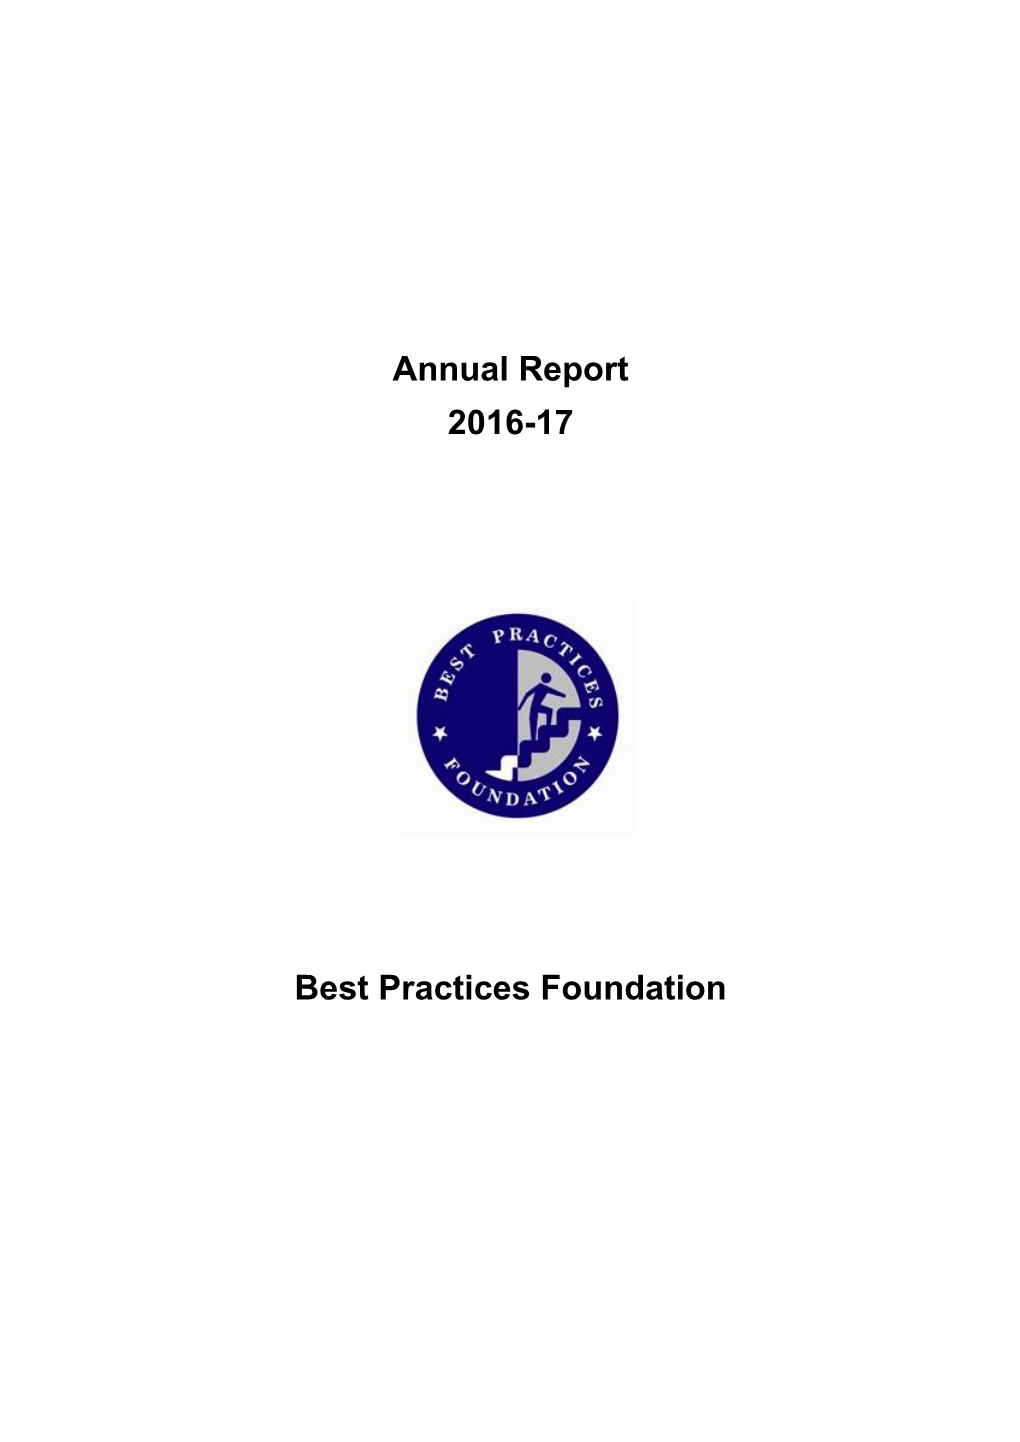 Annual Report 2016-17 Best Practices Foundation